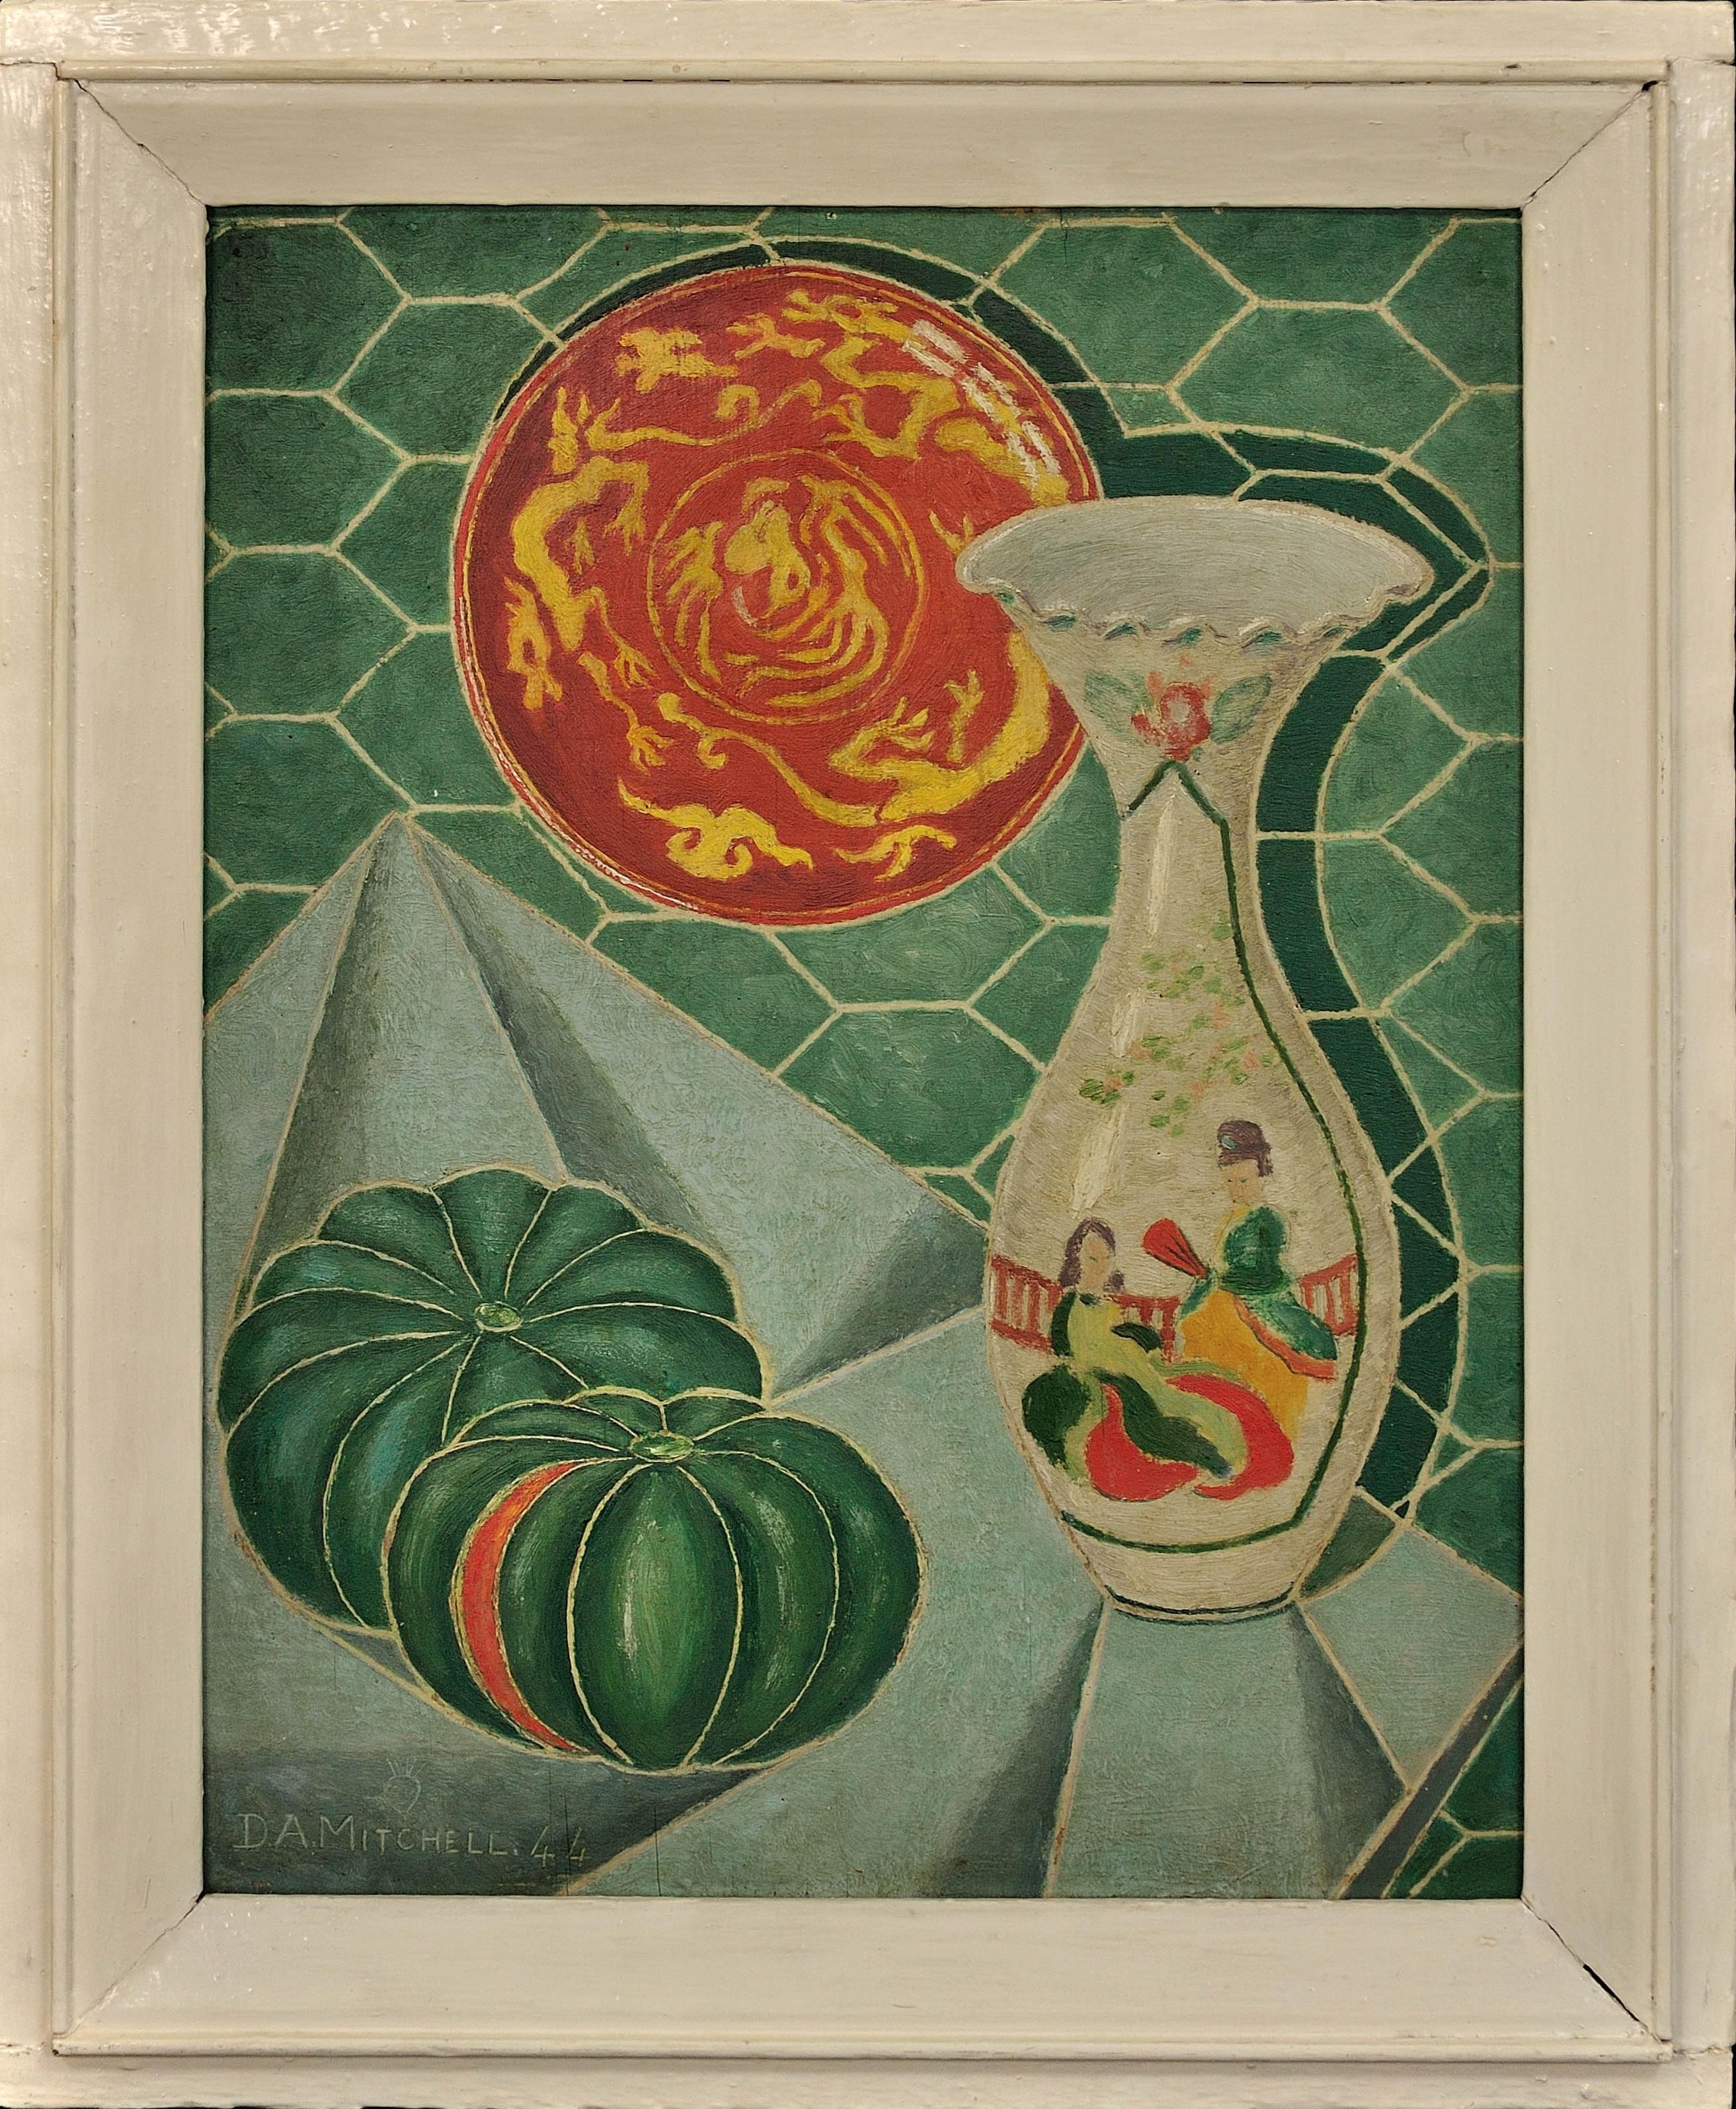 Denis Mitchell Still-Life Painting - Still Life of Gourds with Japanese Celadon Vase & Dragon Decorated Plate, 1944. 